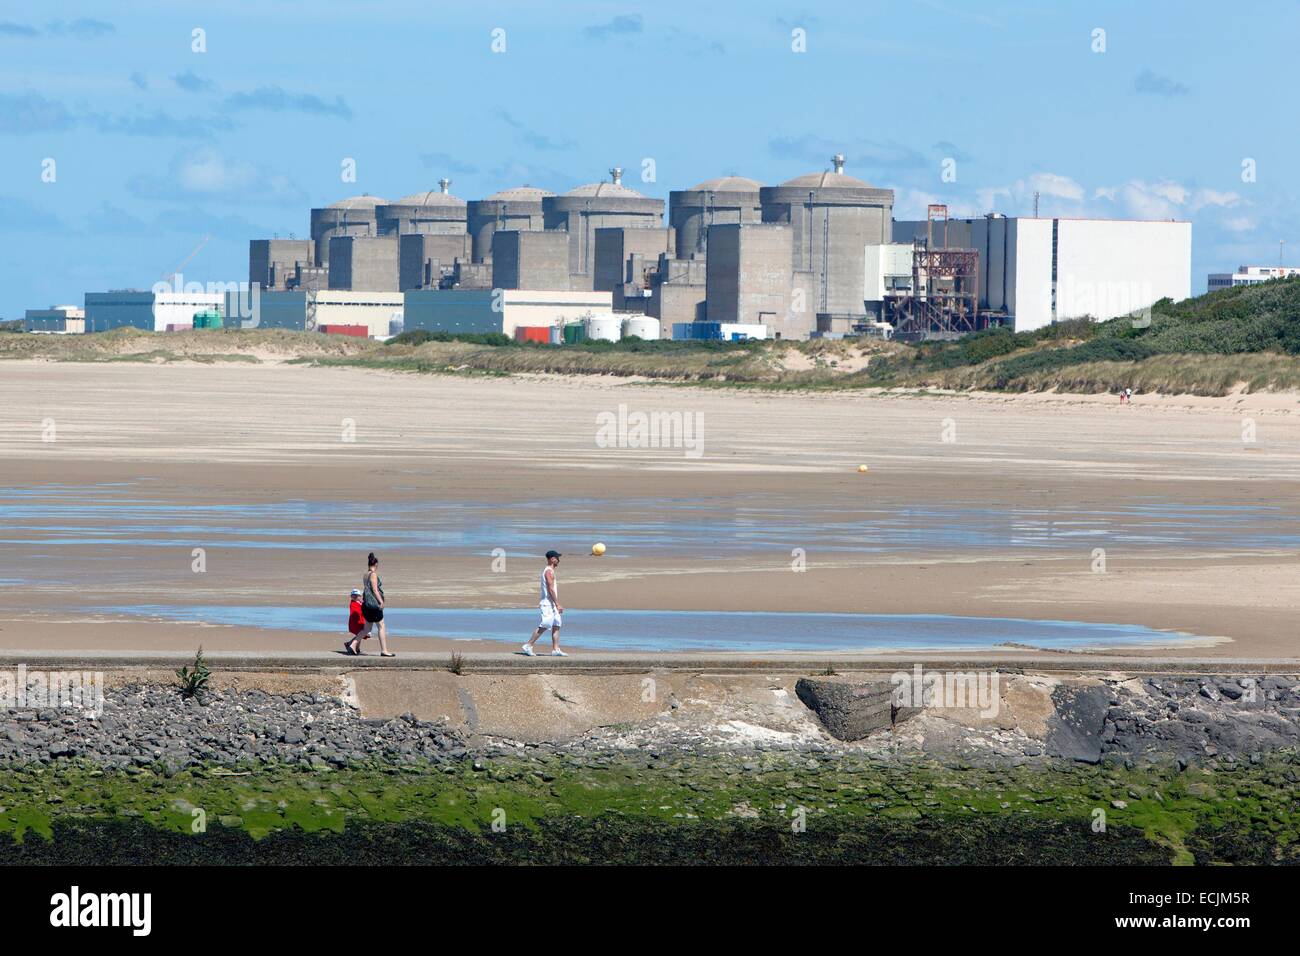 France, Nord, Gravelines, family strolling along the pier Petit Fort Philippe and 6 reactors at the Gravelines nuclear power plant Stock Photo